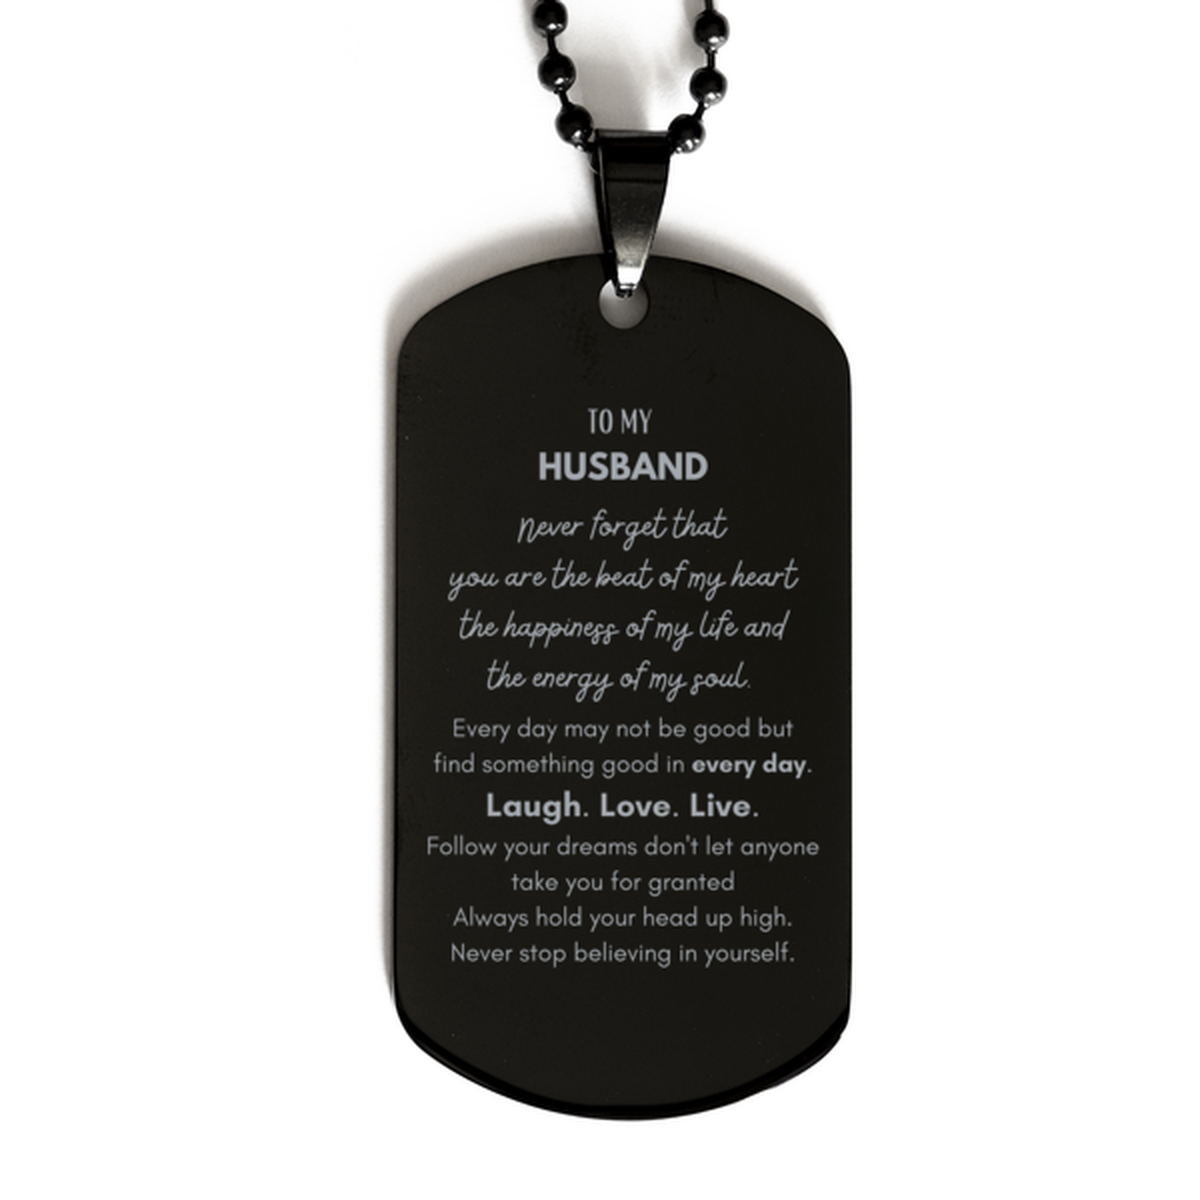 To My Husband Dogtag Gifts, Christmas Husband Black Dog Tag Present, Birthday Unique Motivational For Husband, To My Husband Never forget that you are the beat of my heart the happiness of my life and the energy of my soul